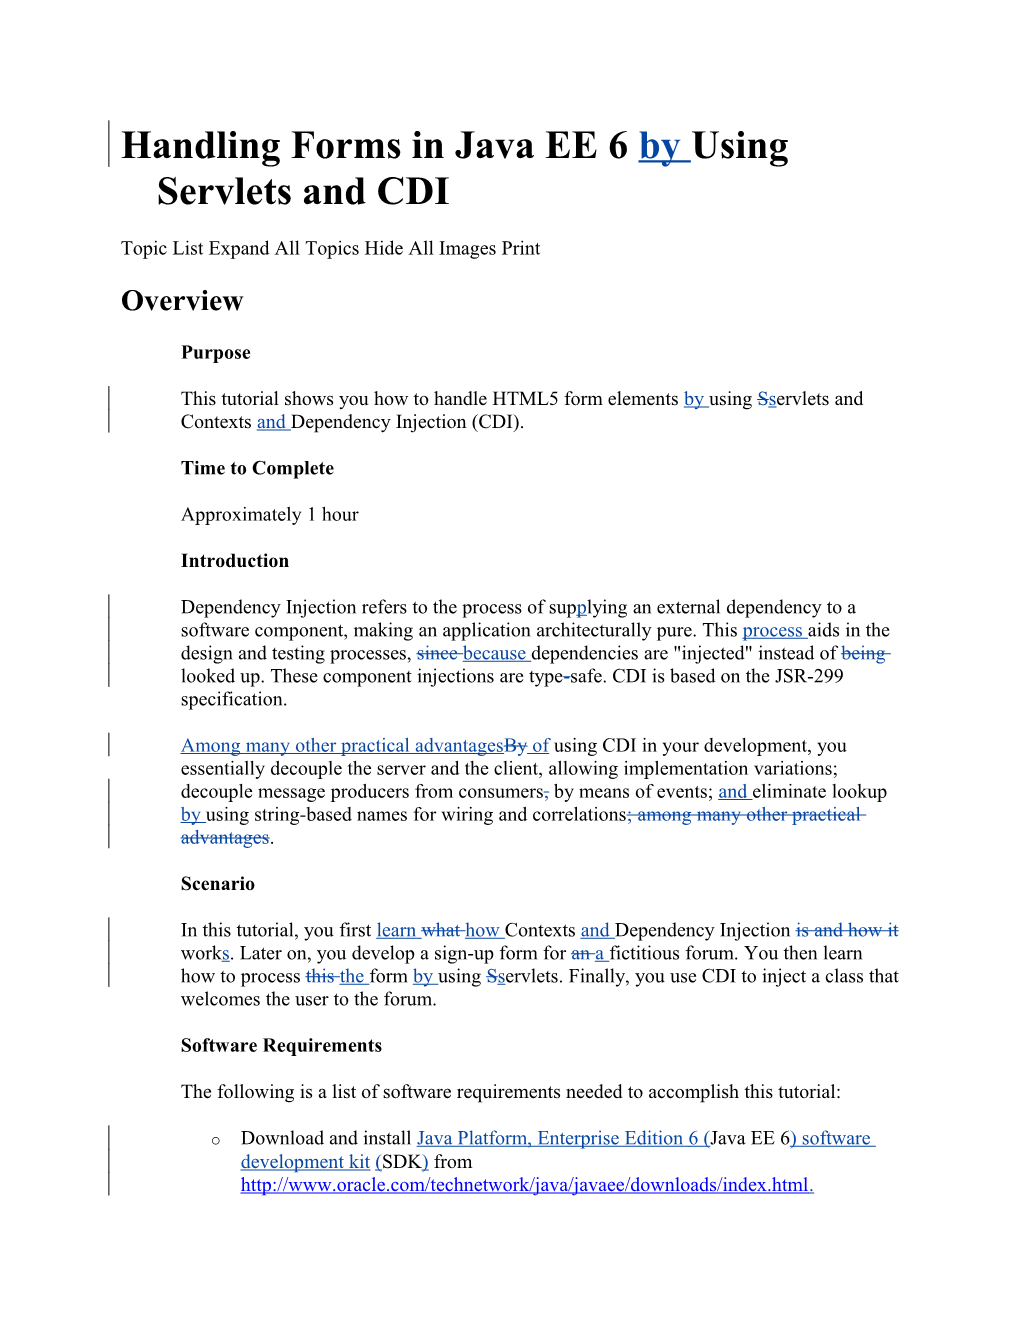 Handling Forms in Java EE 6 by Using Servlets and CDI